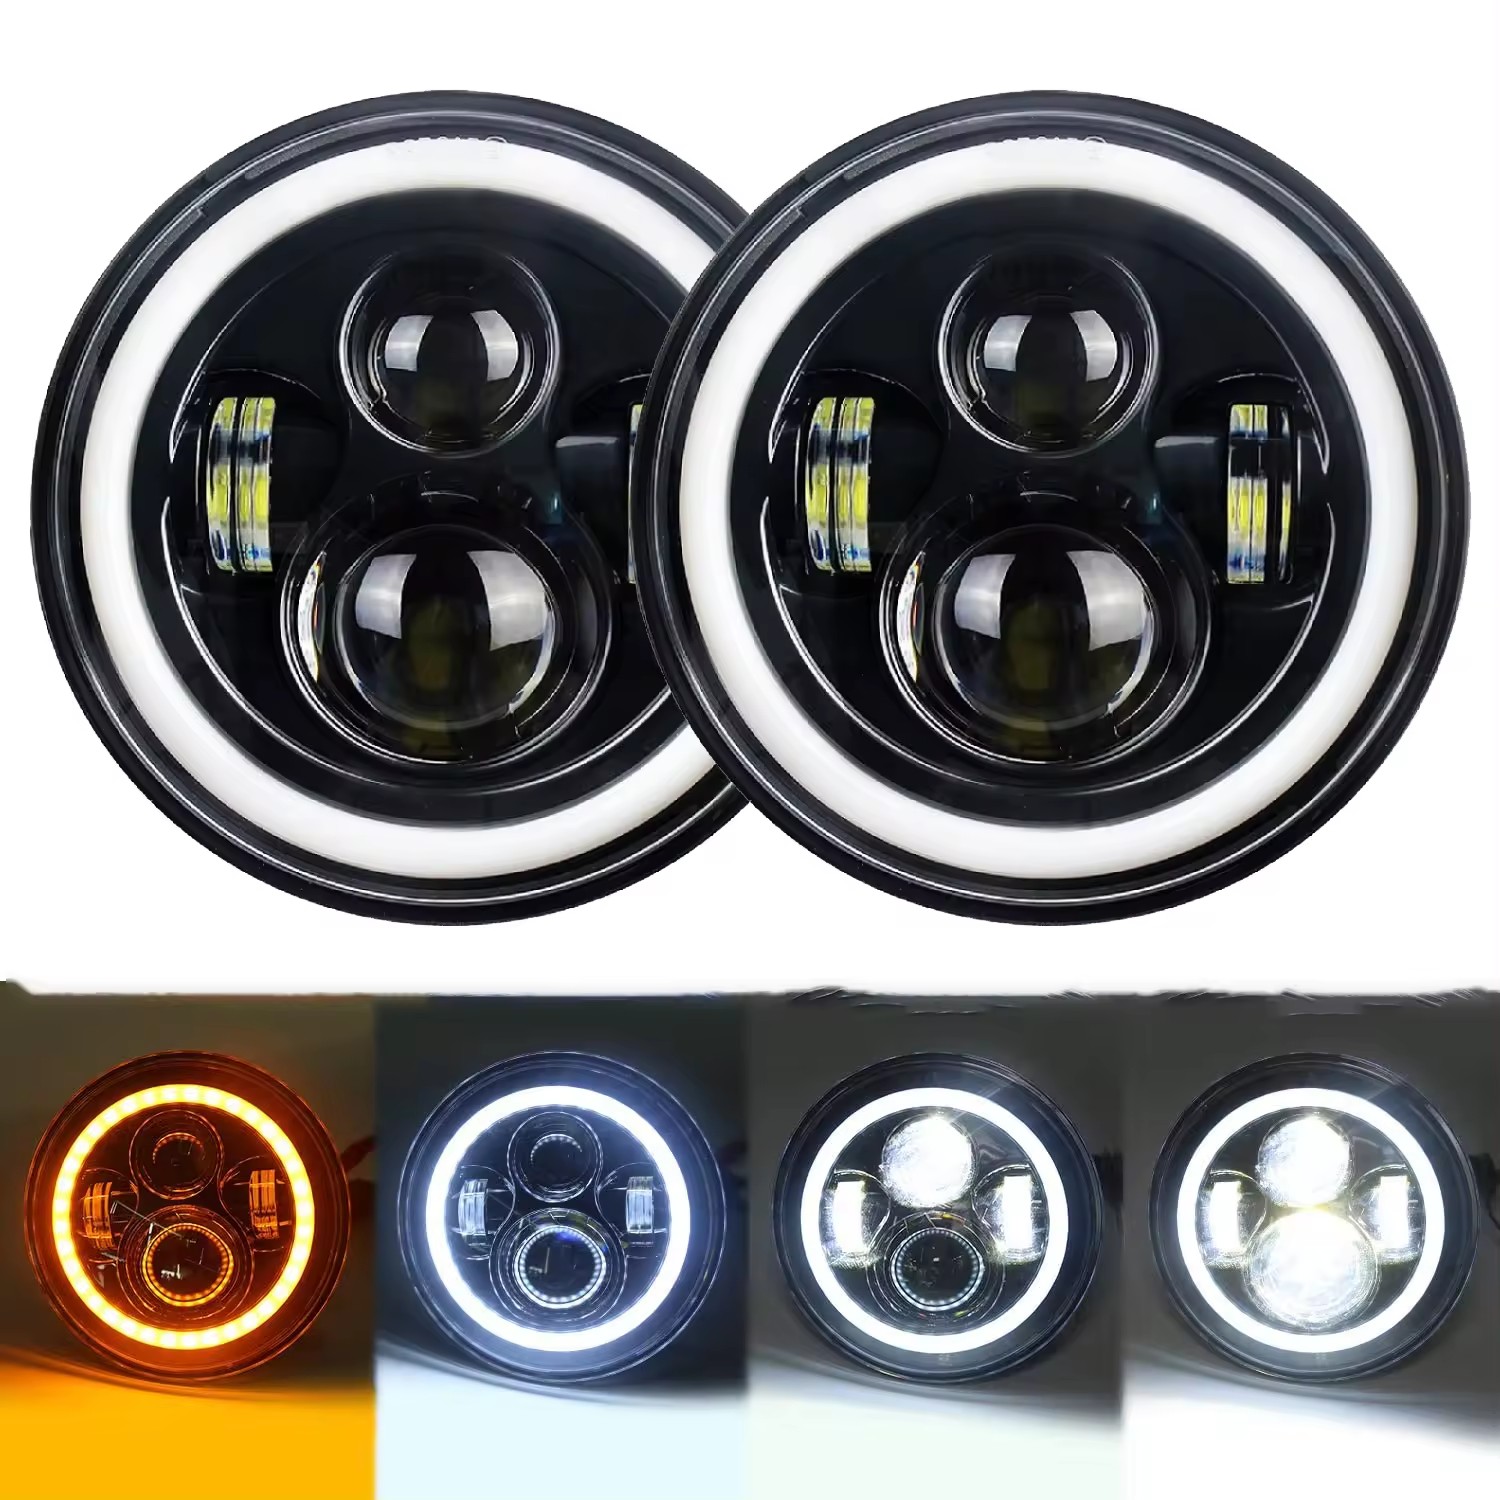 7 Inch Led Round Headlight With Angel Eyes Defender Led Farol For Jeep Troller Fusca Beetle Kombi - Click Image to Close